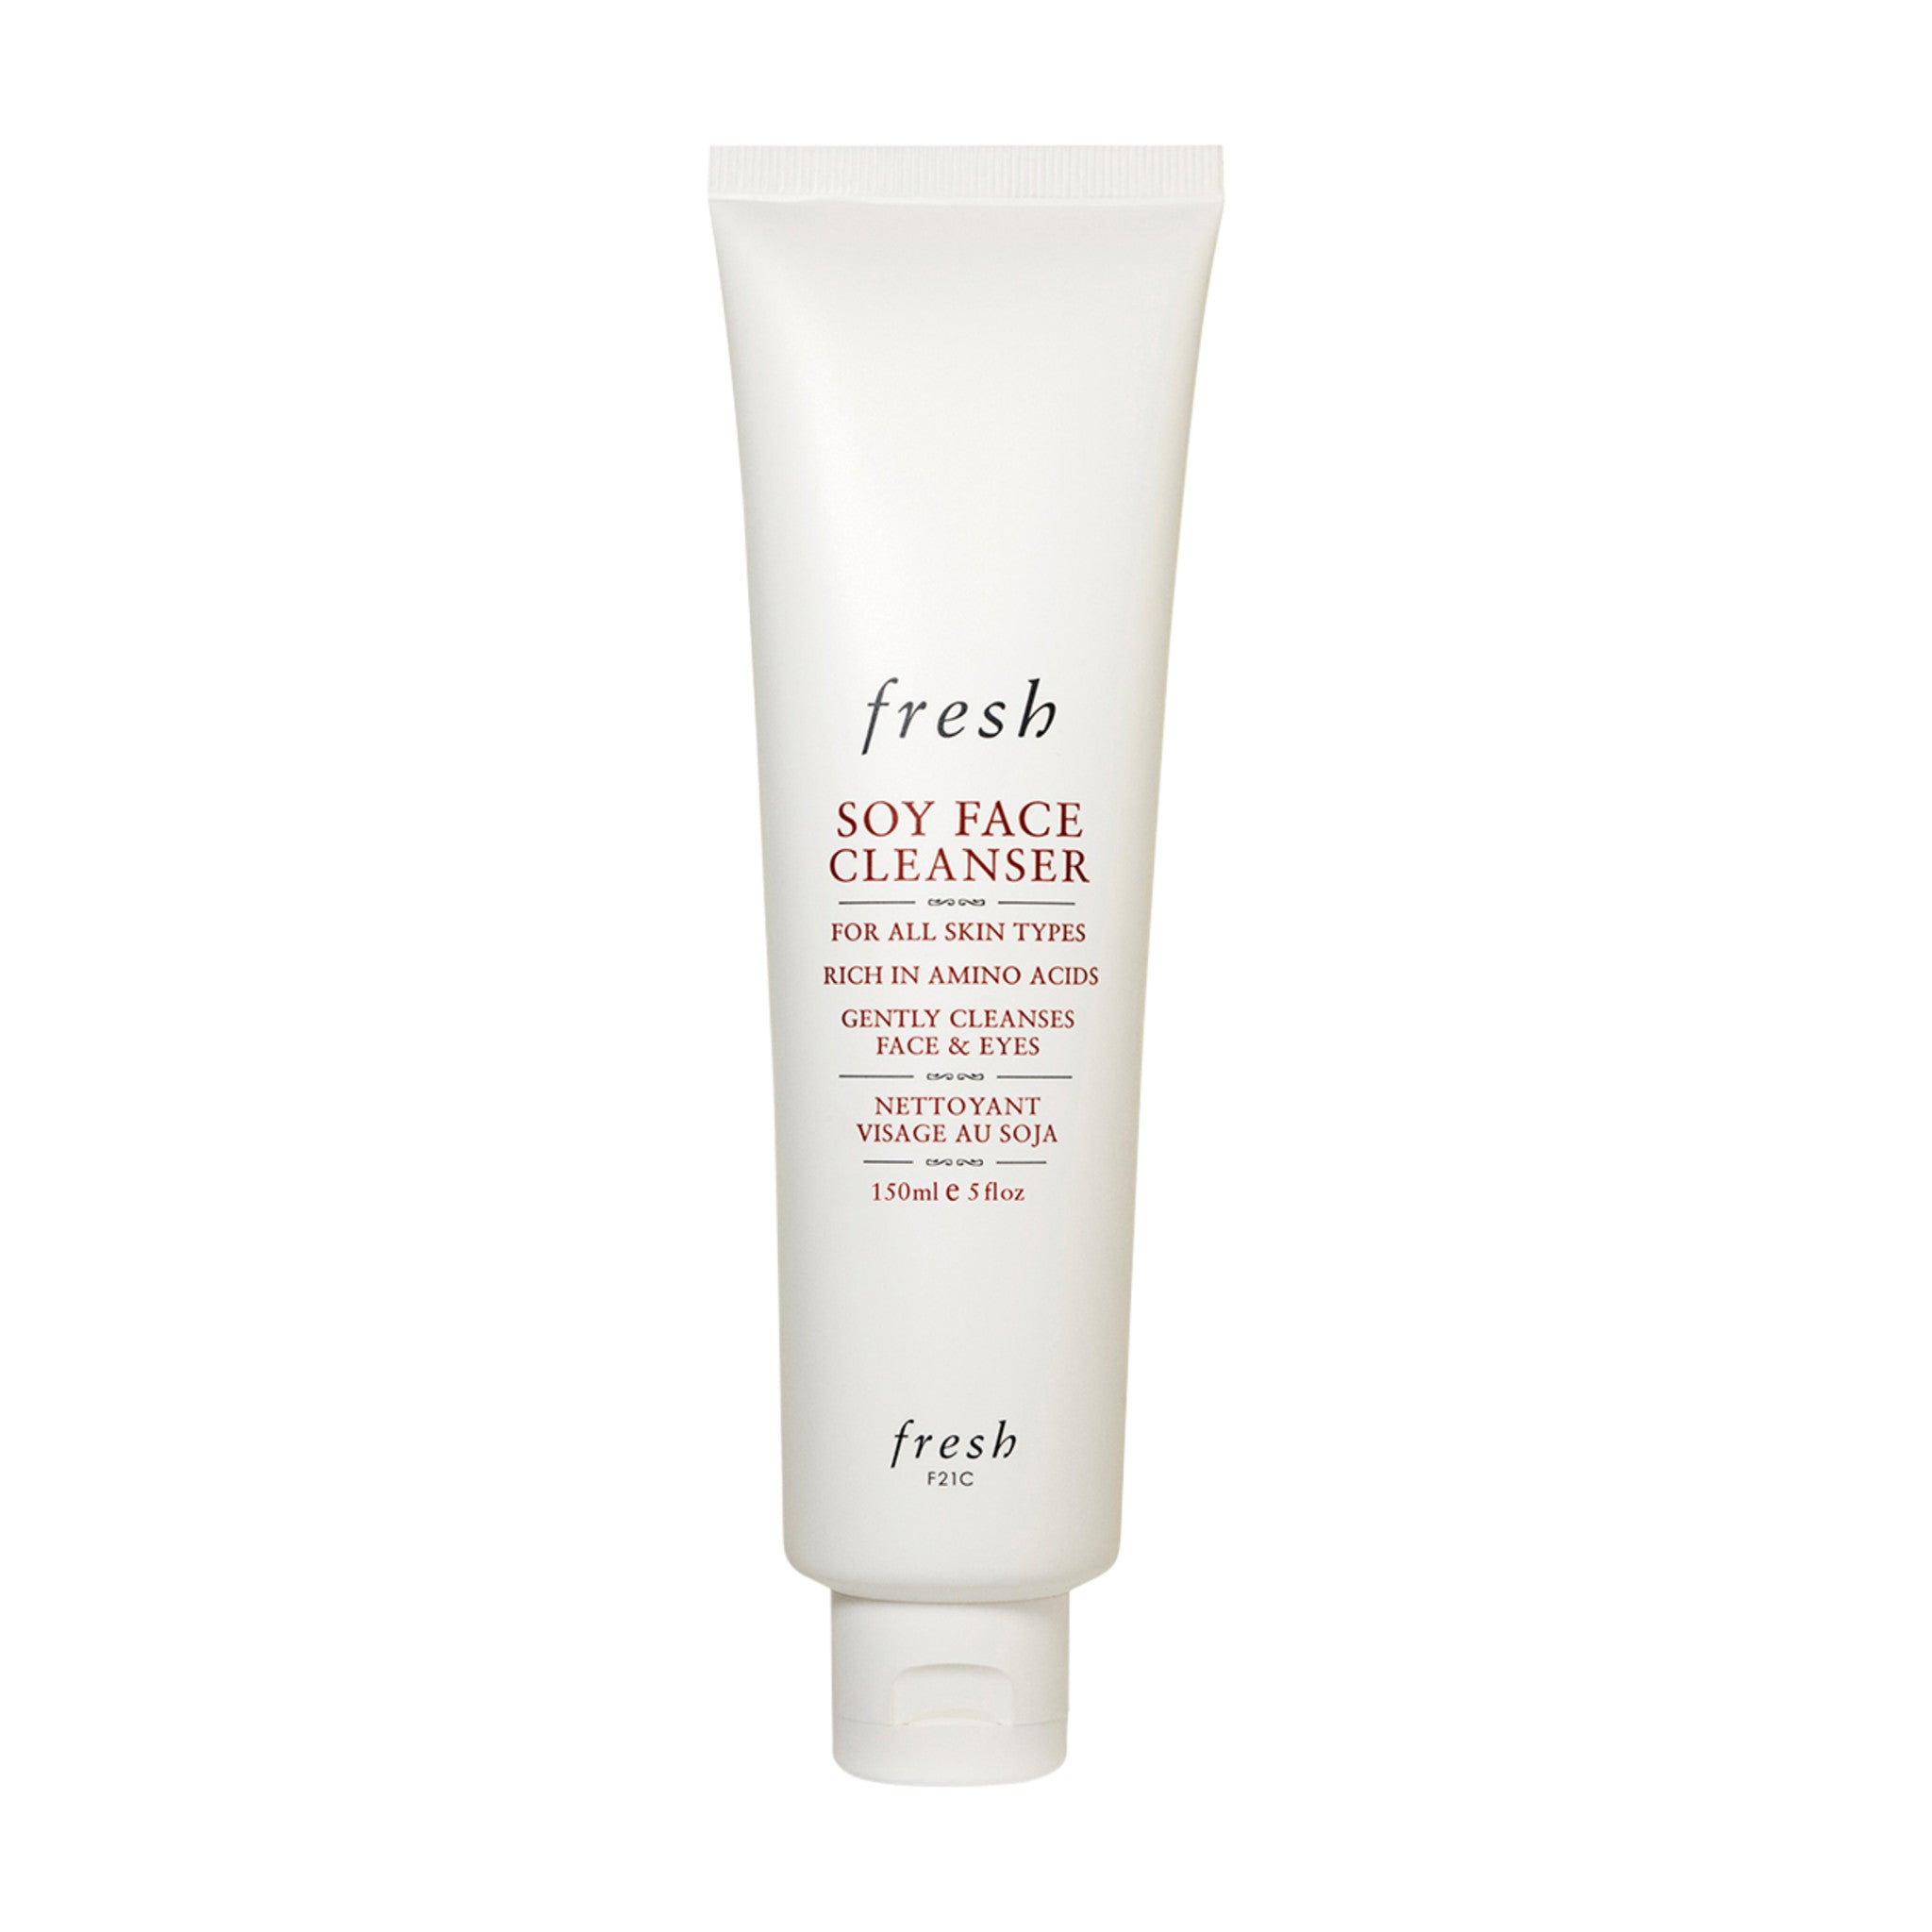 Fresh Soy Face Cleanser Size variant: 5.2 oz main image.